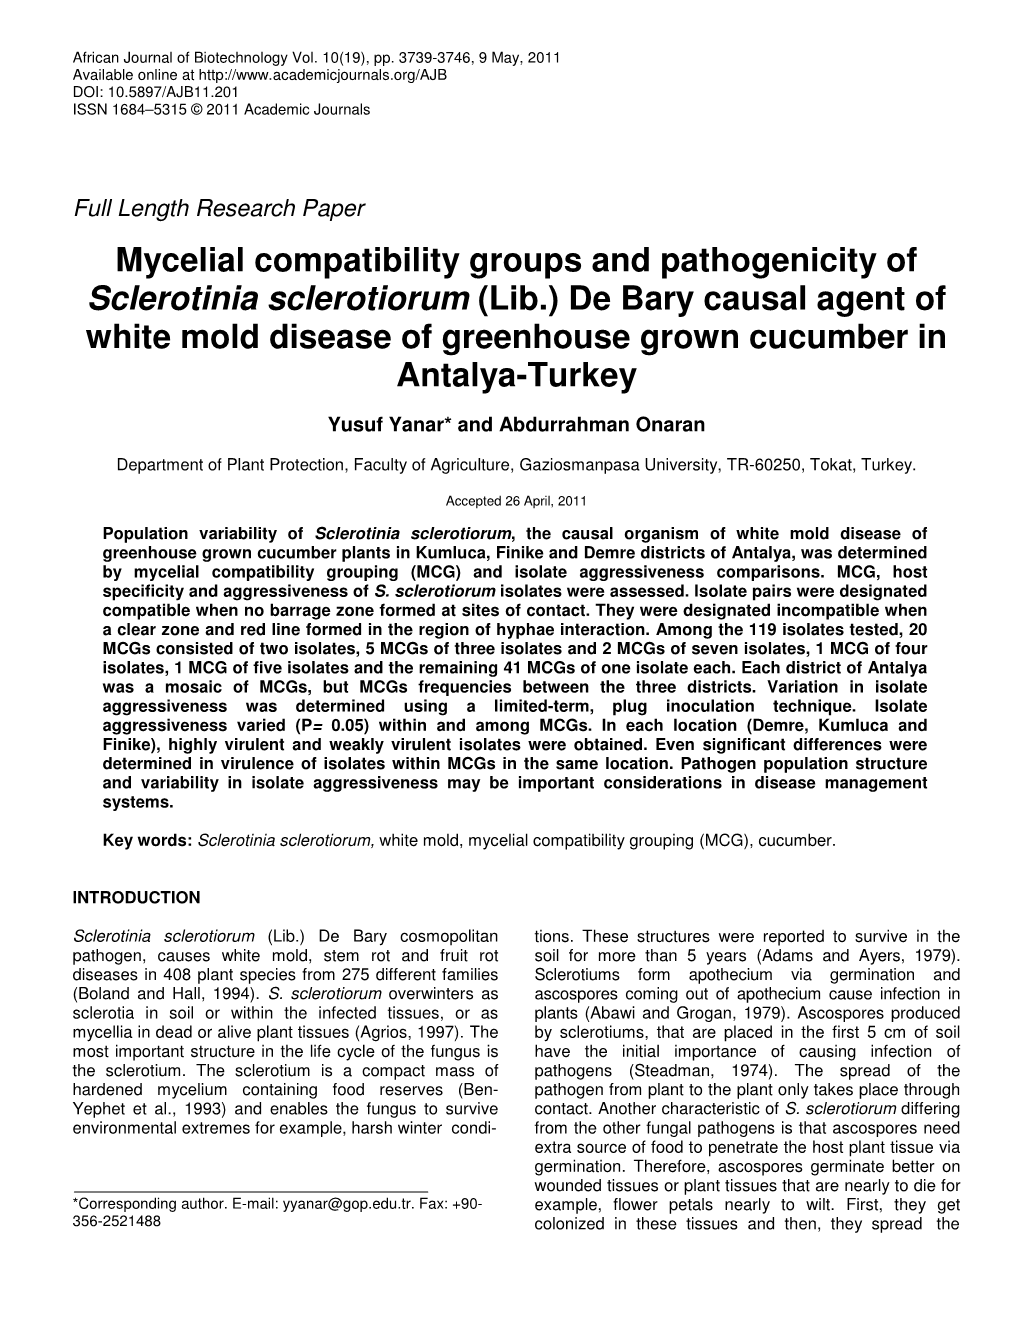 Mycelial Compatibility Groups and Pathogenicity of Sclerotinia